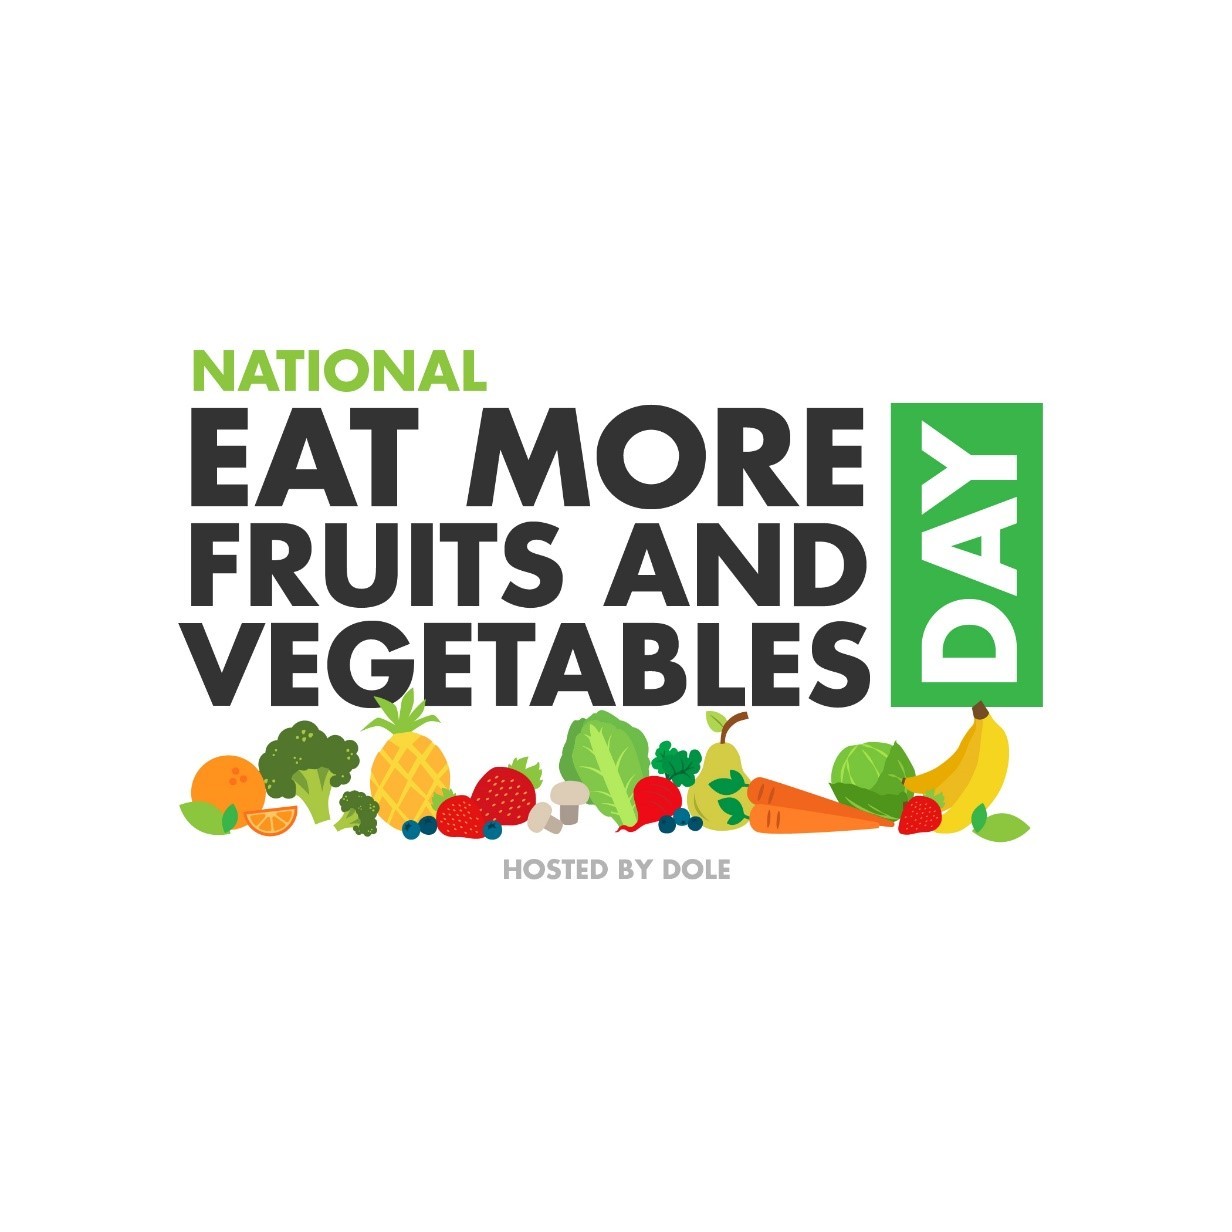 How to Eat More Fruit and Vegetables